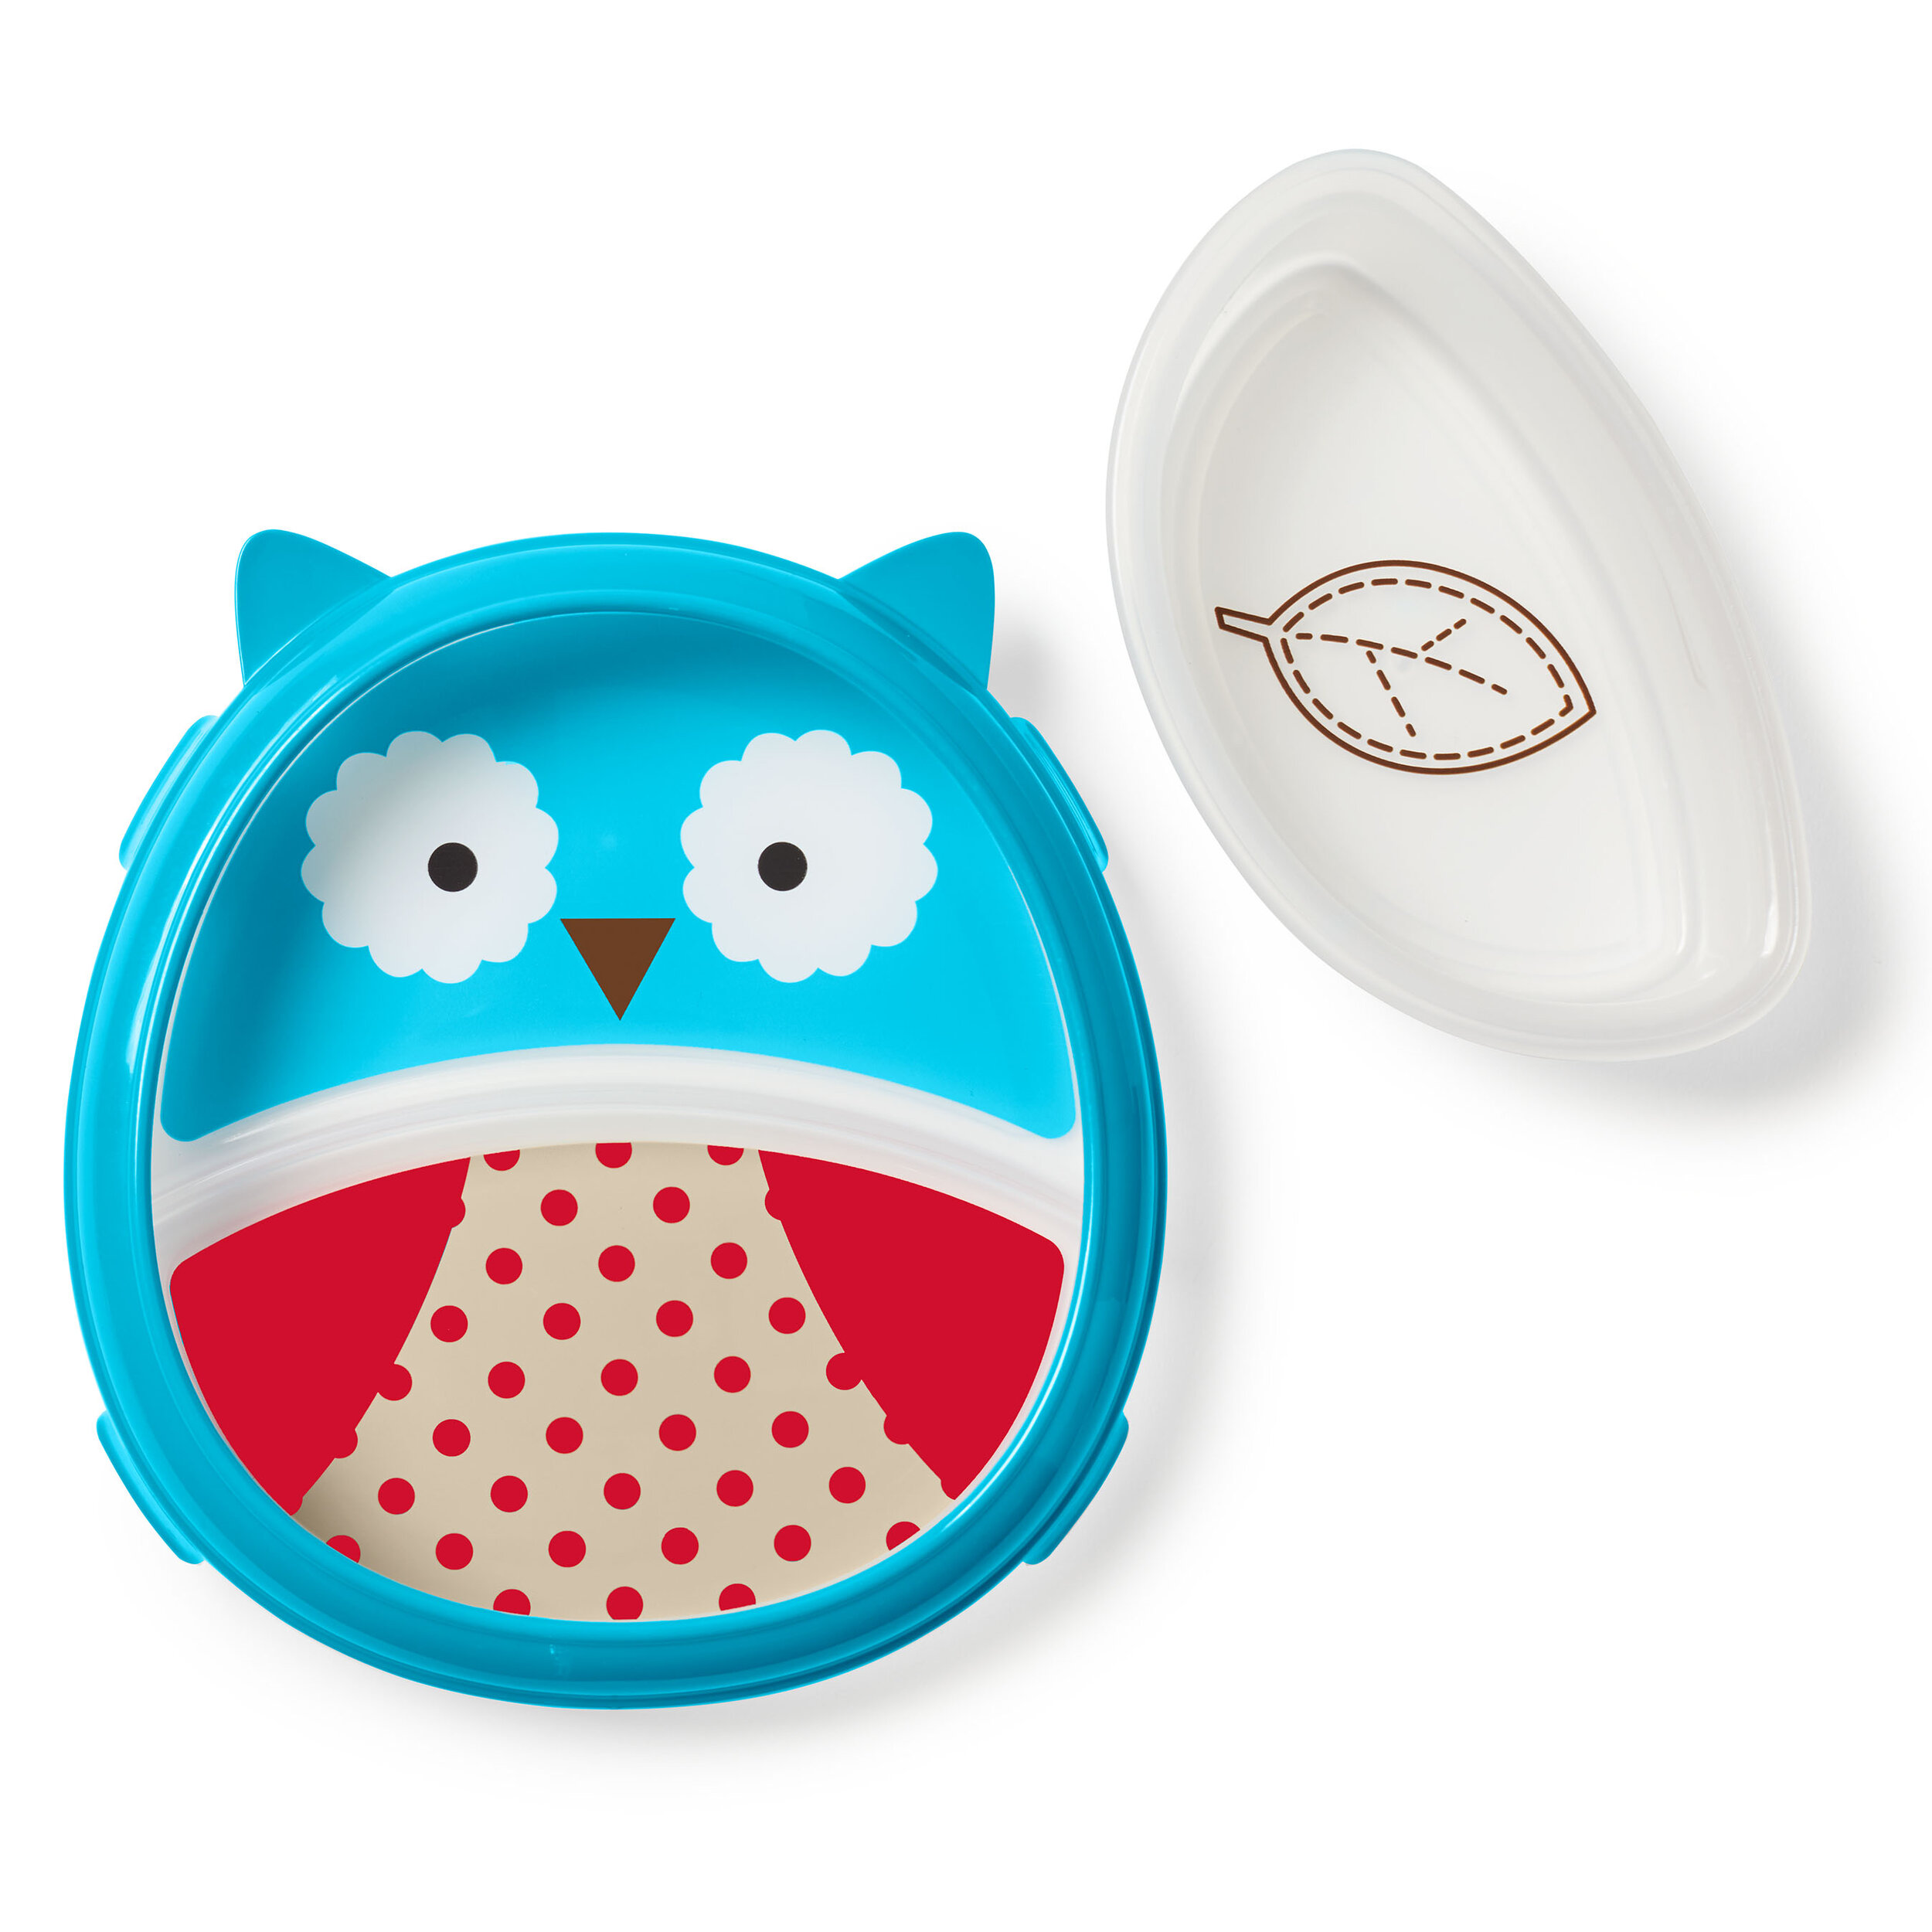 01_Zoo_Smart_Serve_Plate_and_Bowl_Owl_252226_S(2700).jpg